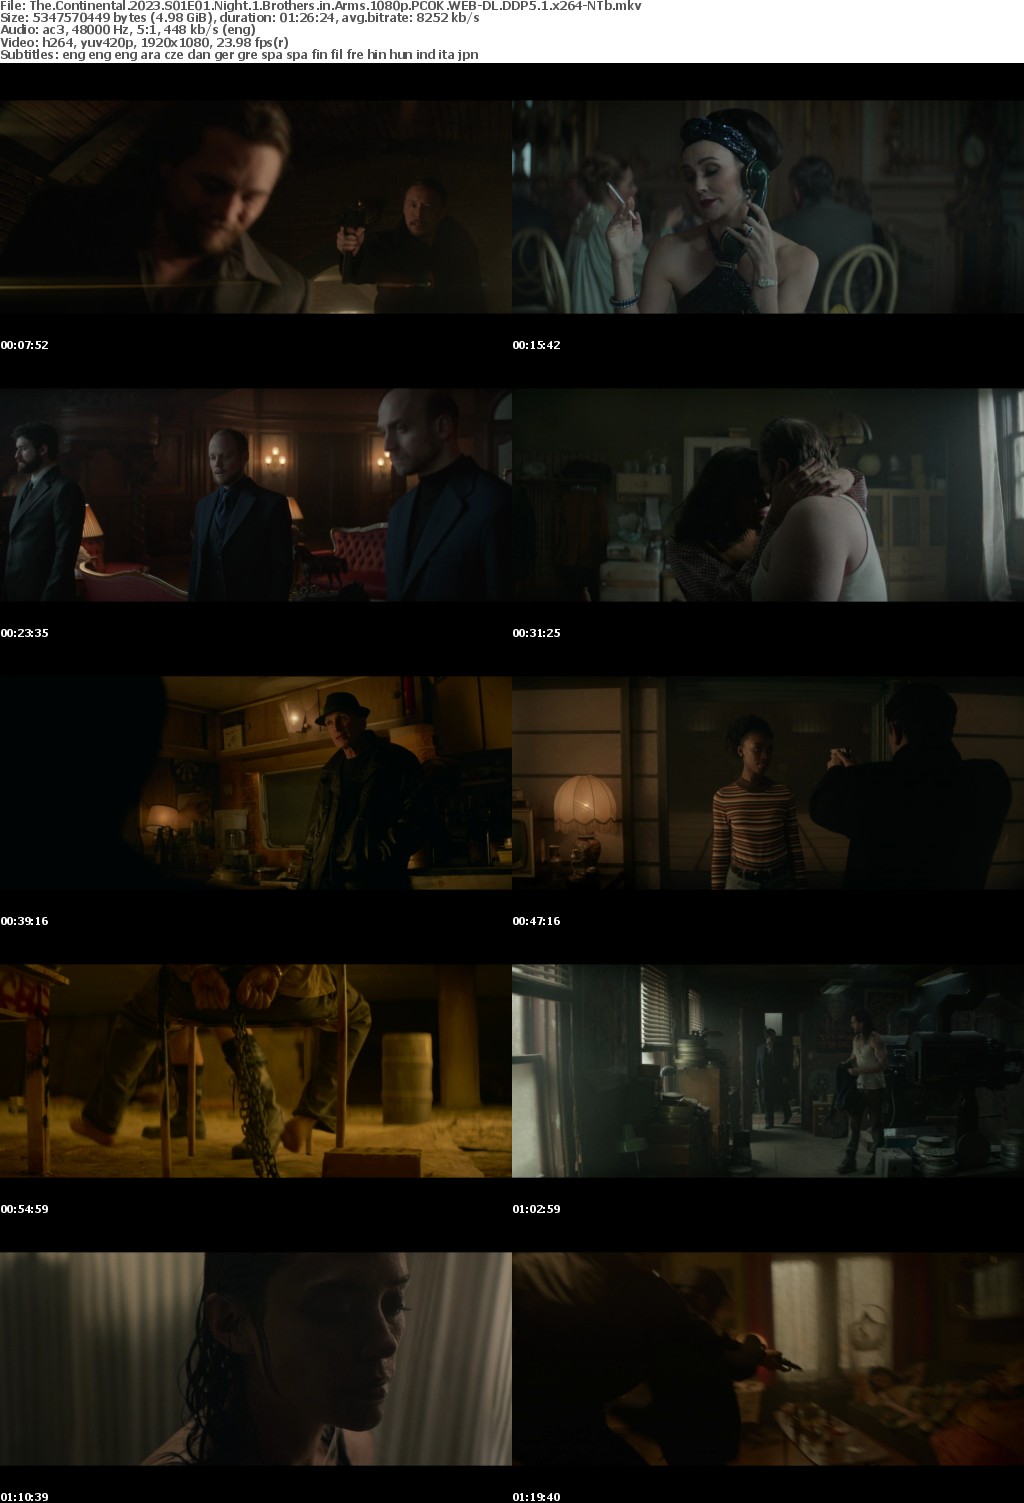 The Continental 2023 S01E01 Night 1 Brothers in Arms 1080p PCOK WEB-DL DDP5 1 x264-NTb